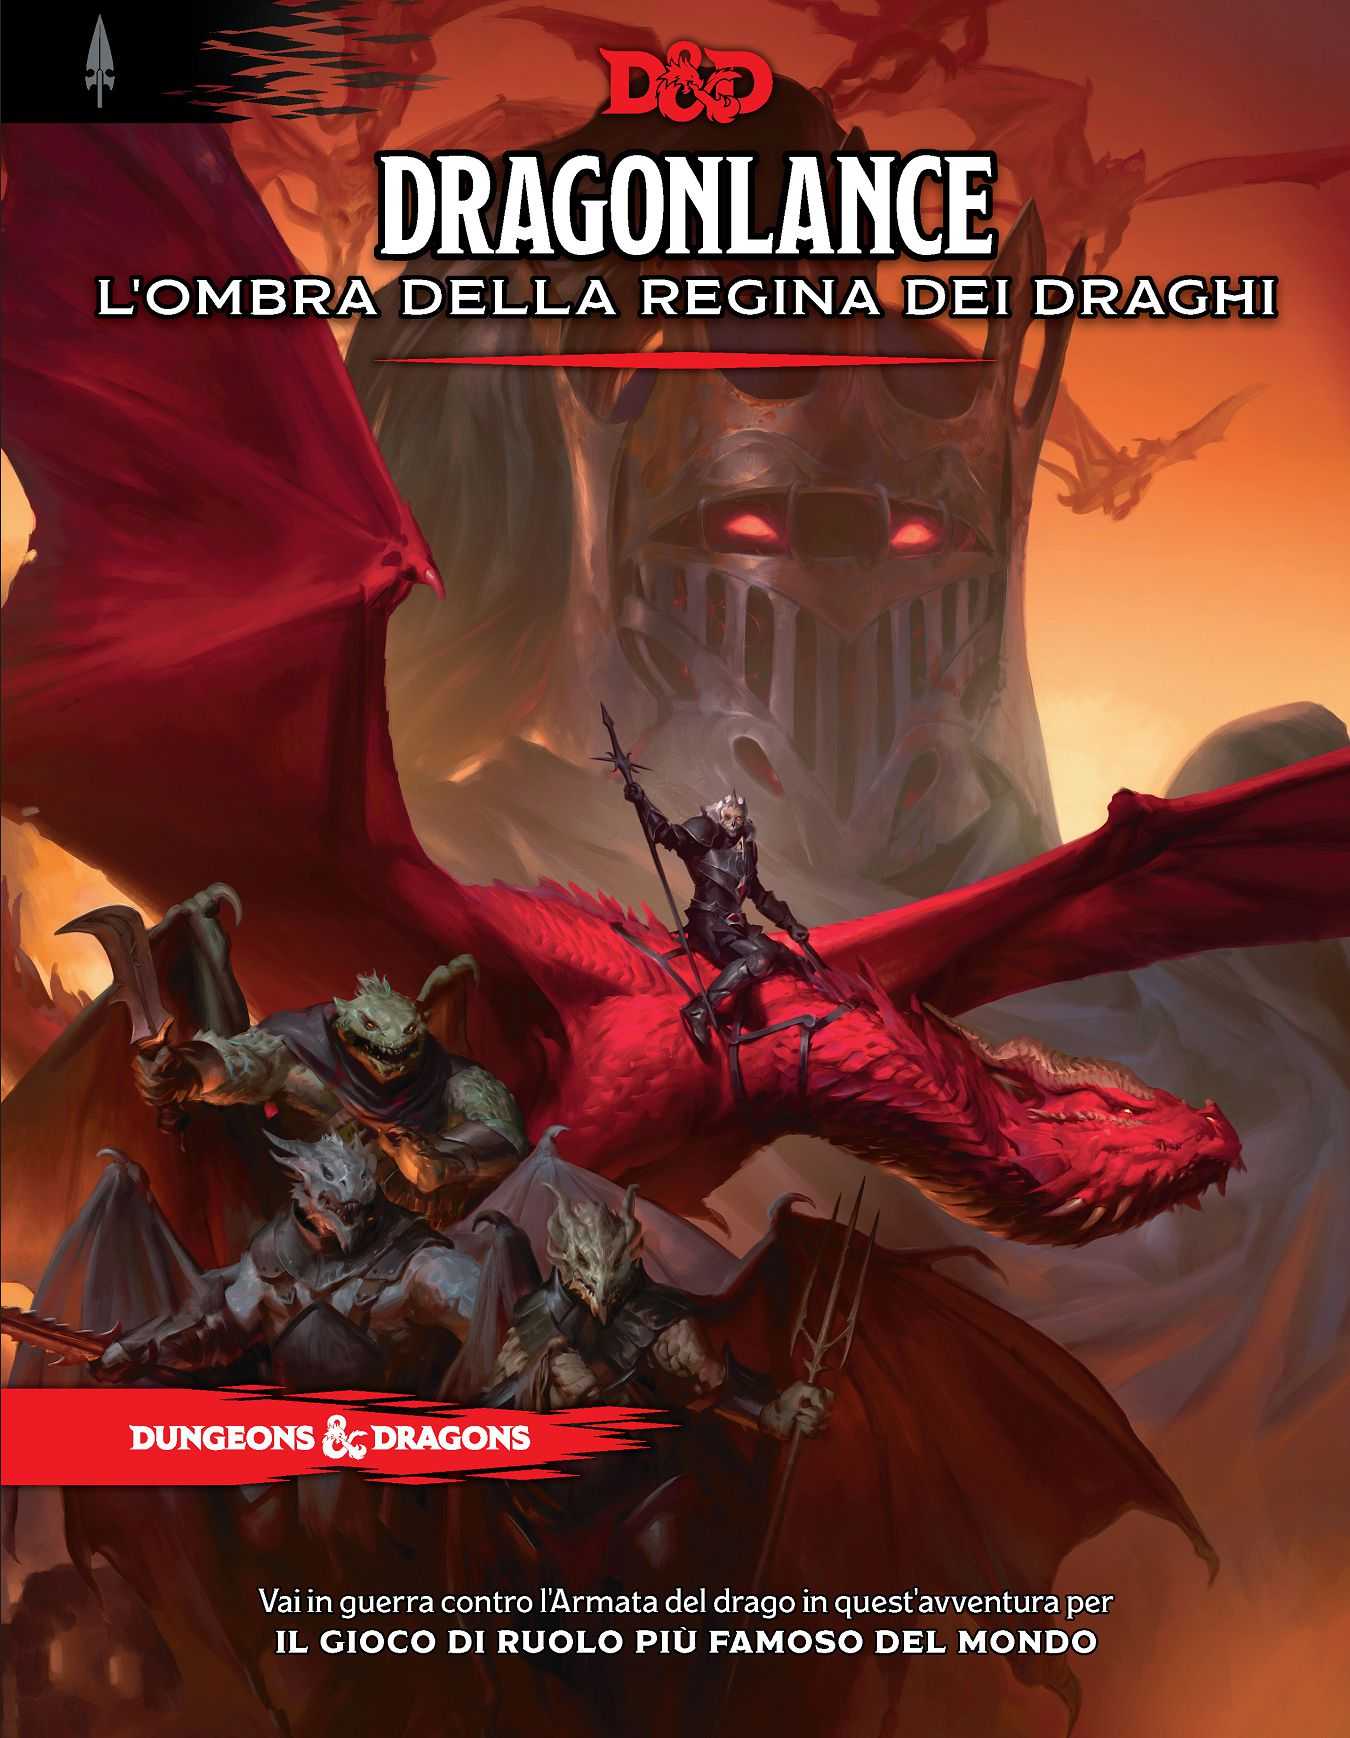 Dungeons & Dragons: in 2023 three more localized manuals!